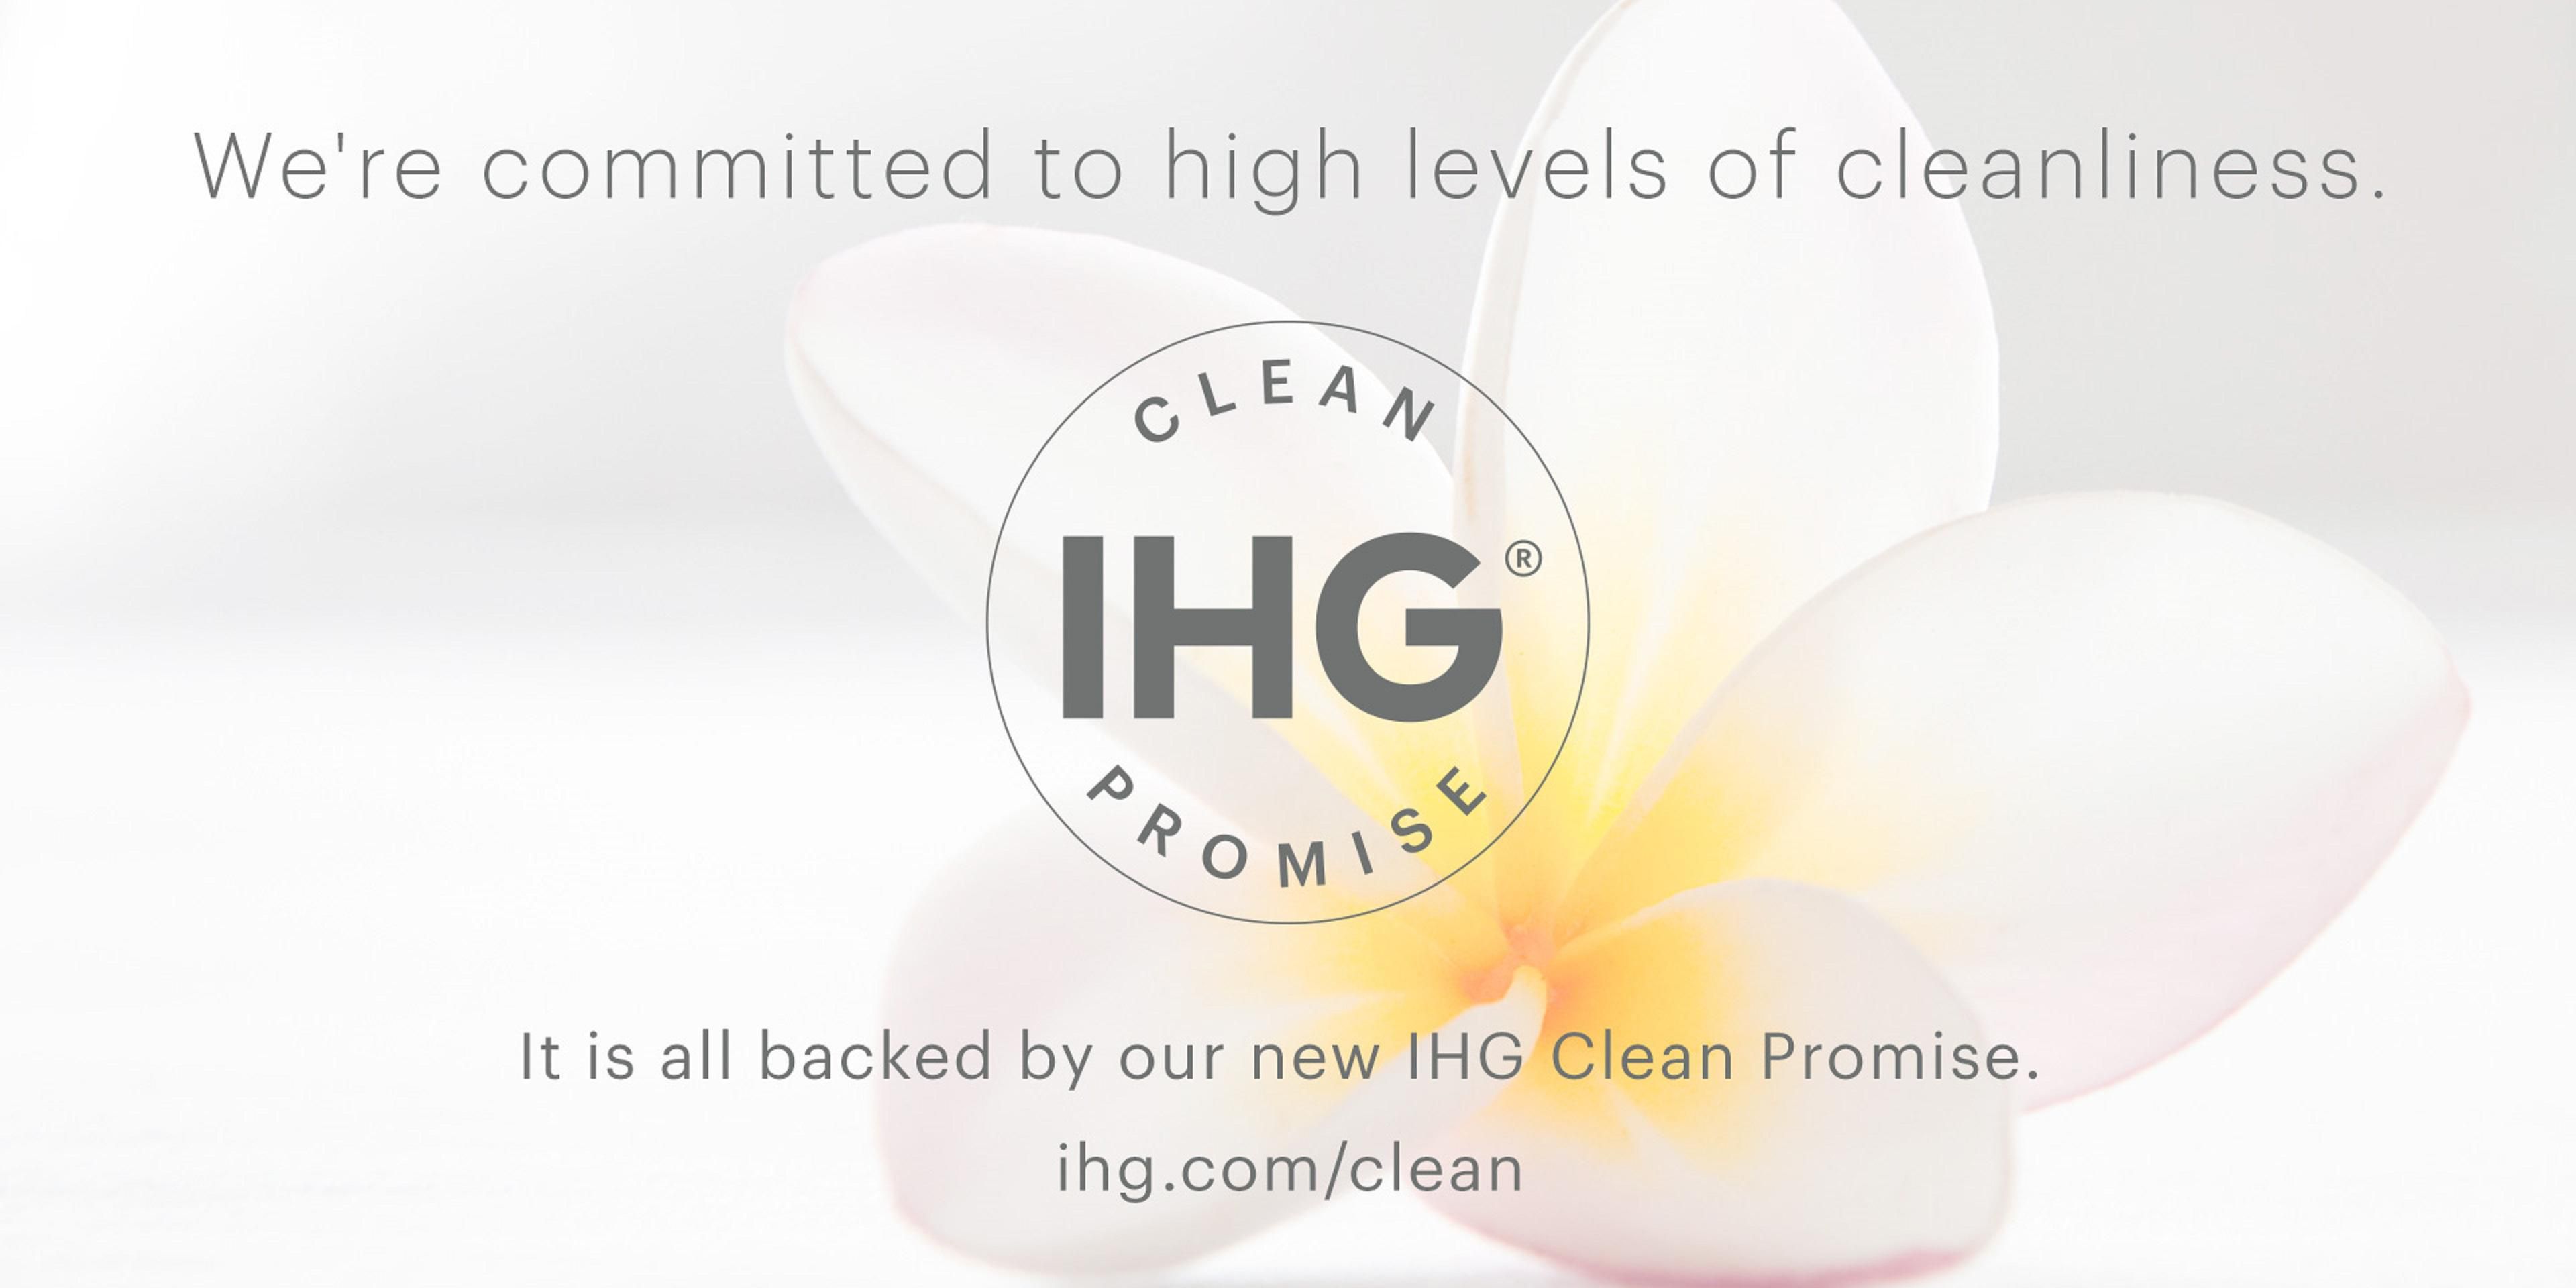 We are enhancing our IHG Way of Clean program by partnering with Cleveland Clinic and Diversey on new global initiatives to help ensure you feel safe. We promise when you are ready to travel again, your stay will meet our high standards of cleanliness. If not, we will make it right.